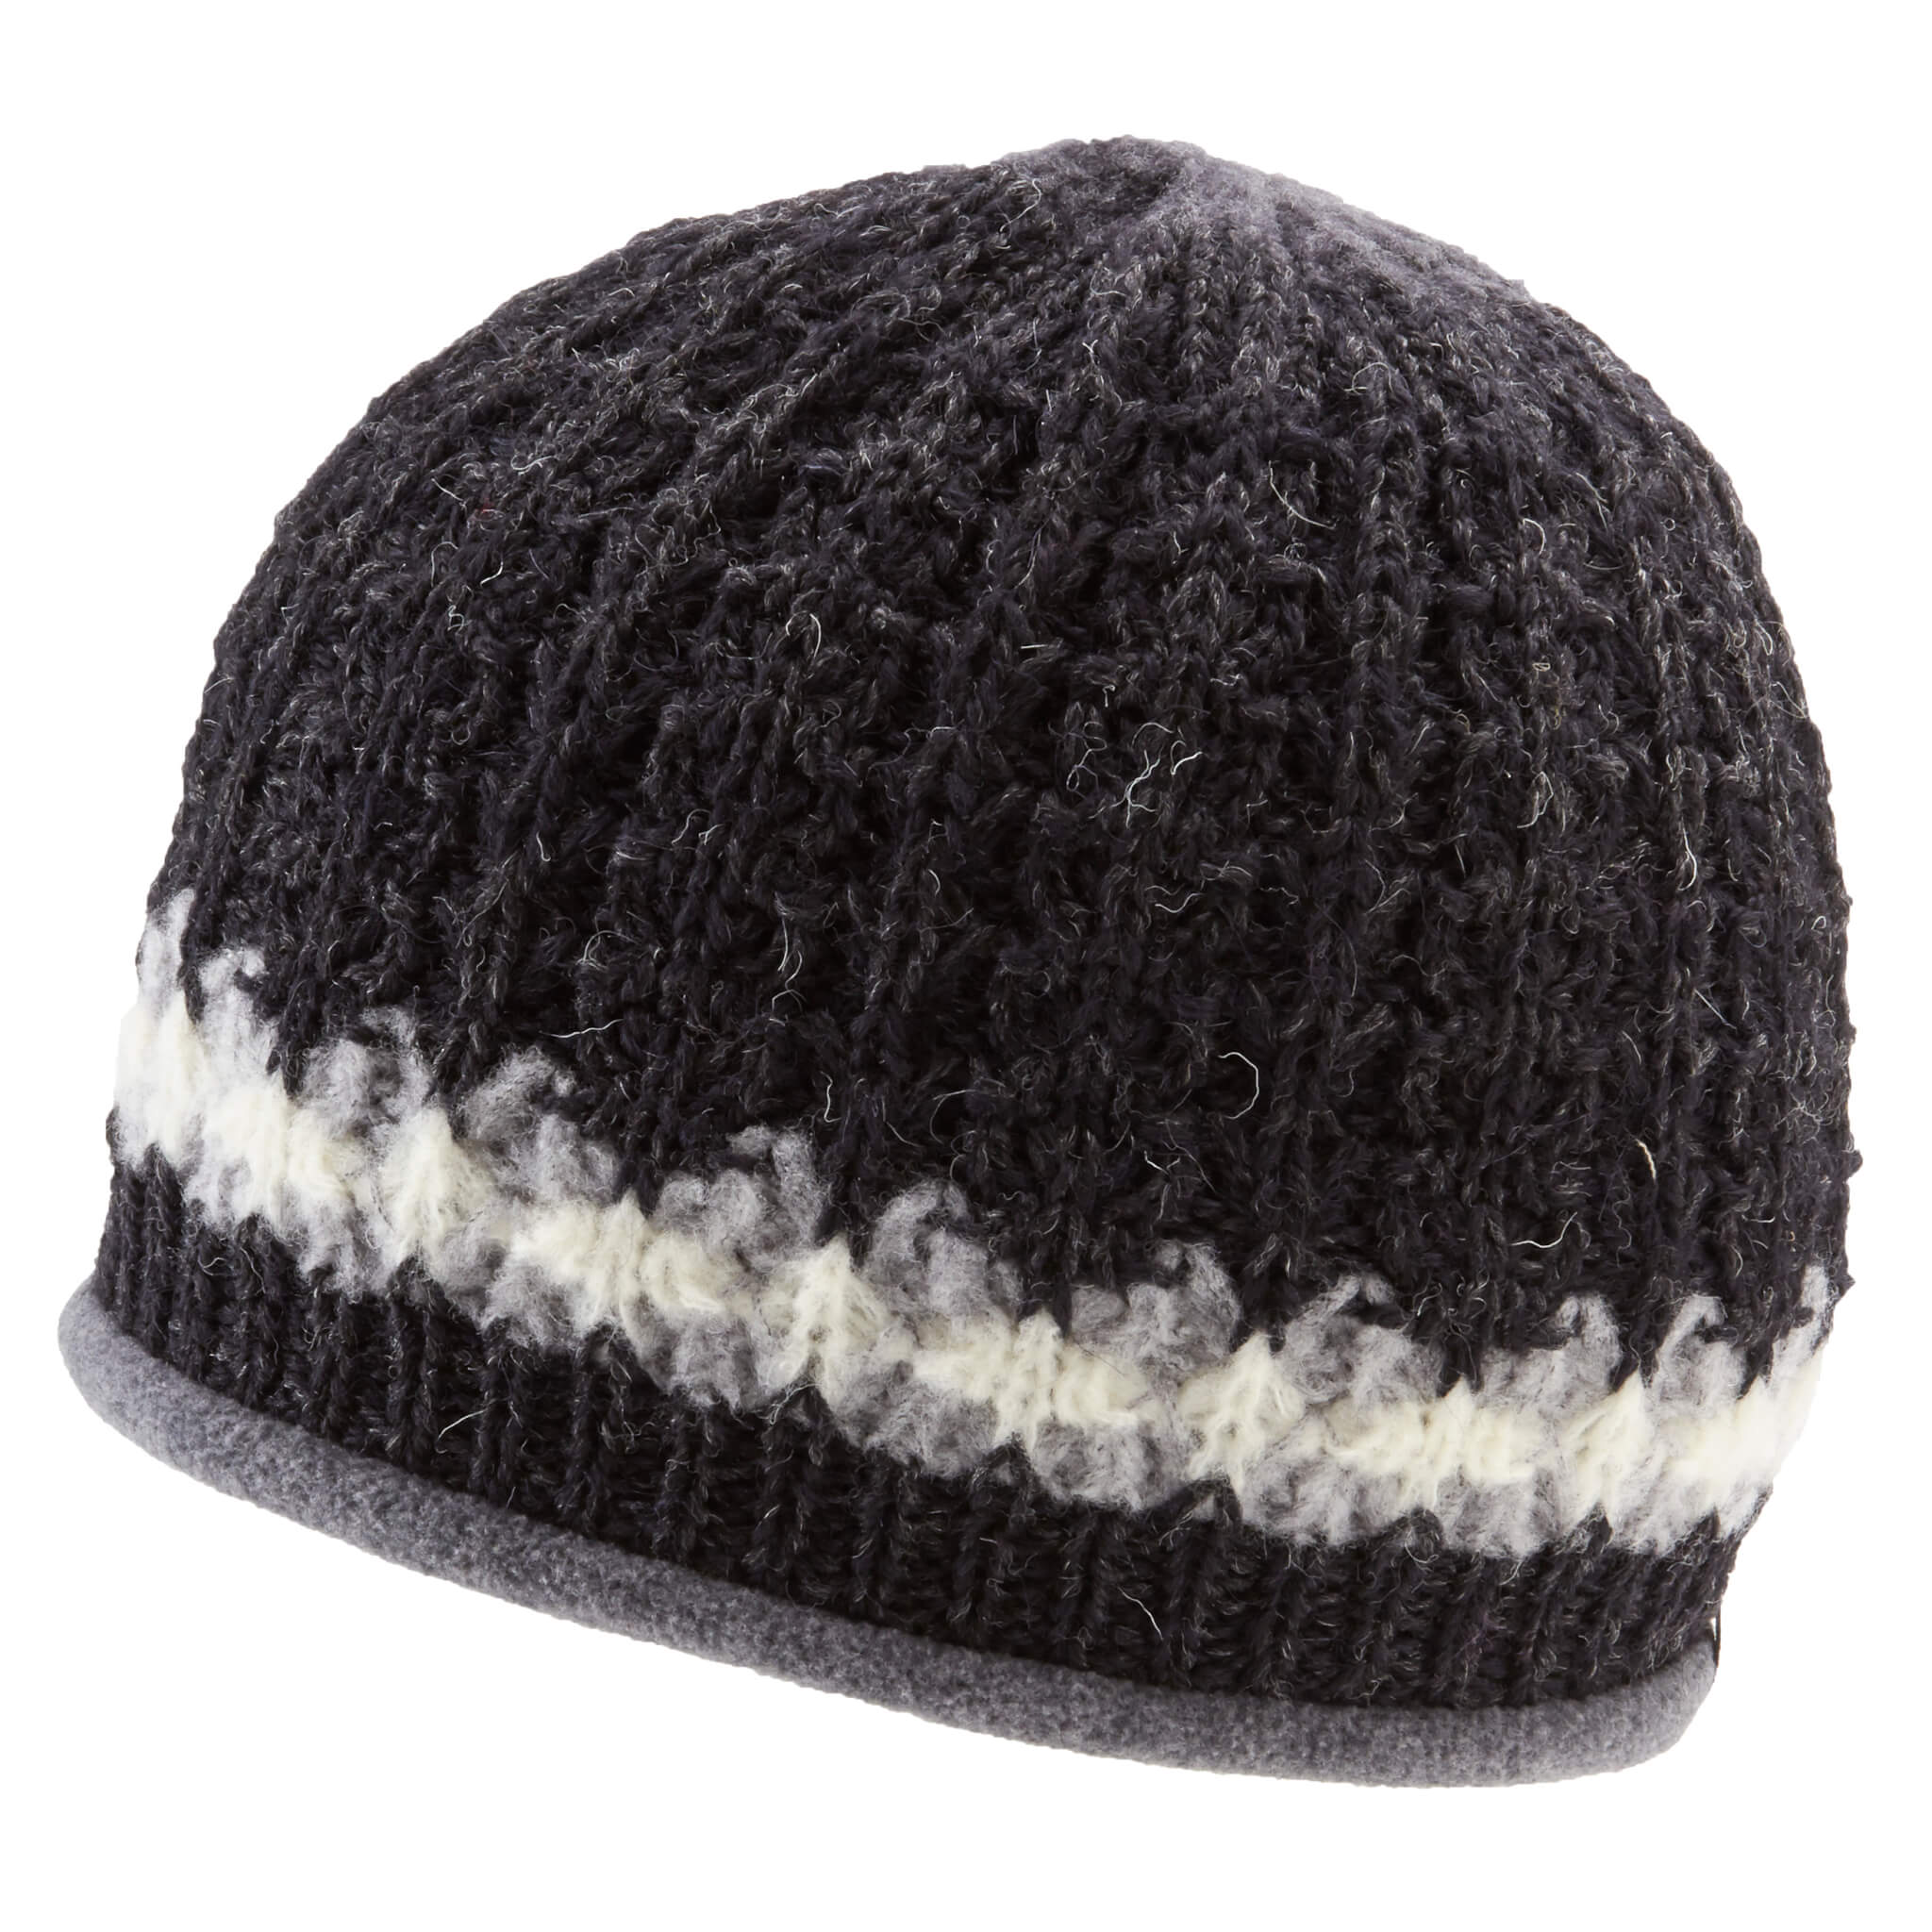 PATTERN ONE – Dohm Knit Hats from the Rocky Mountain Empire